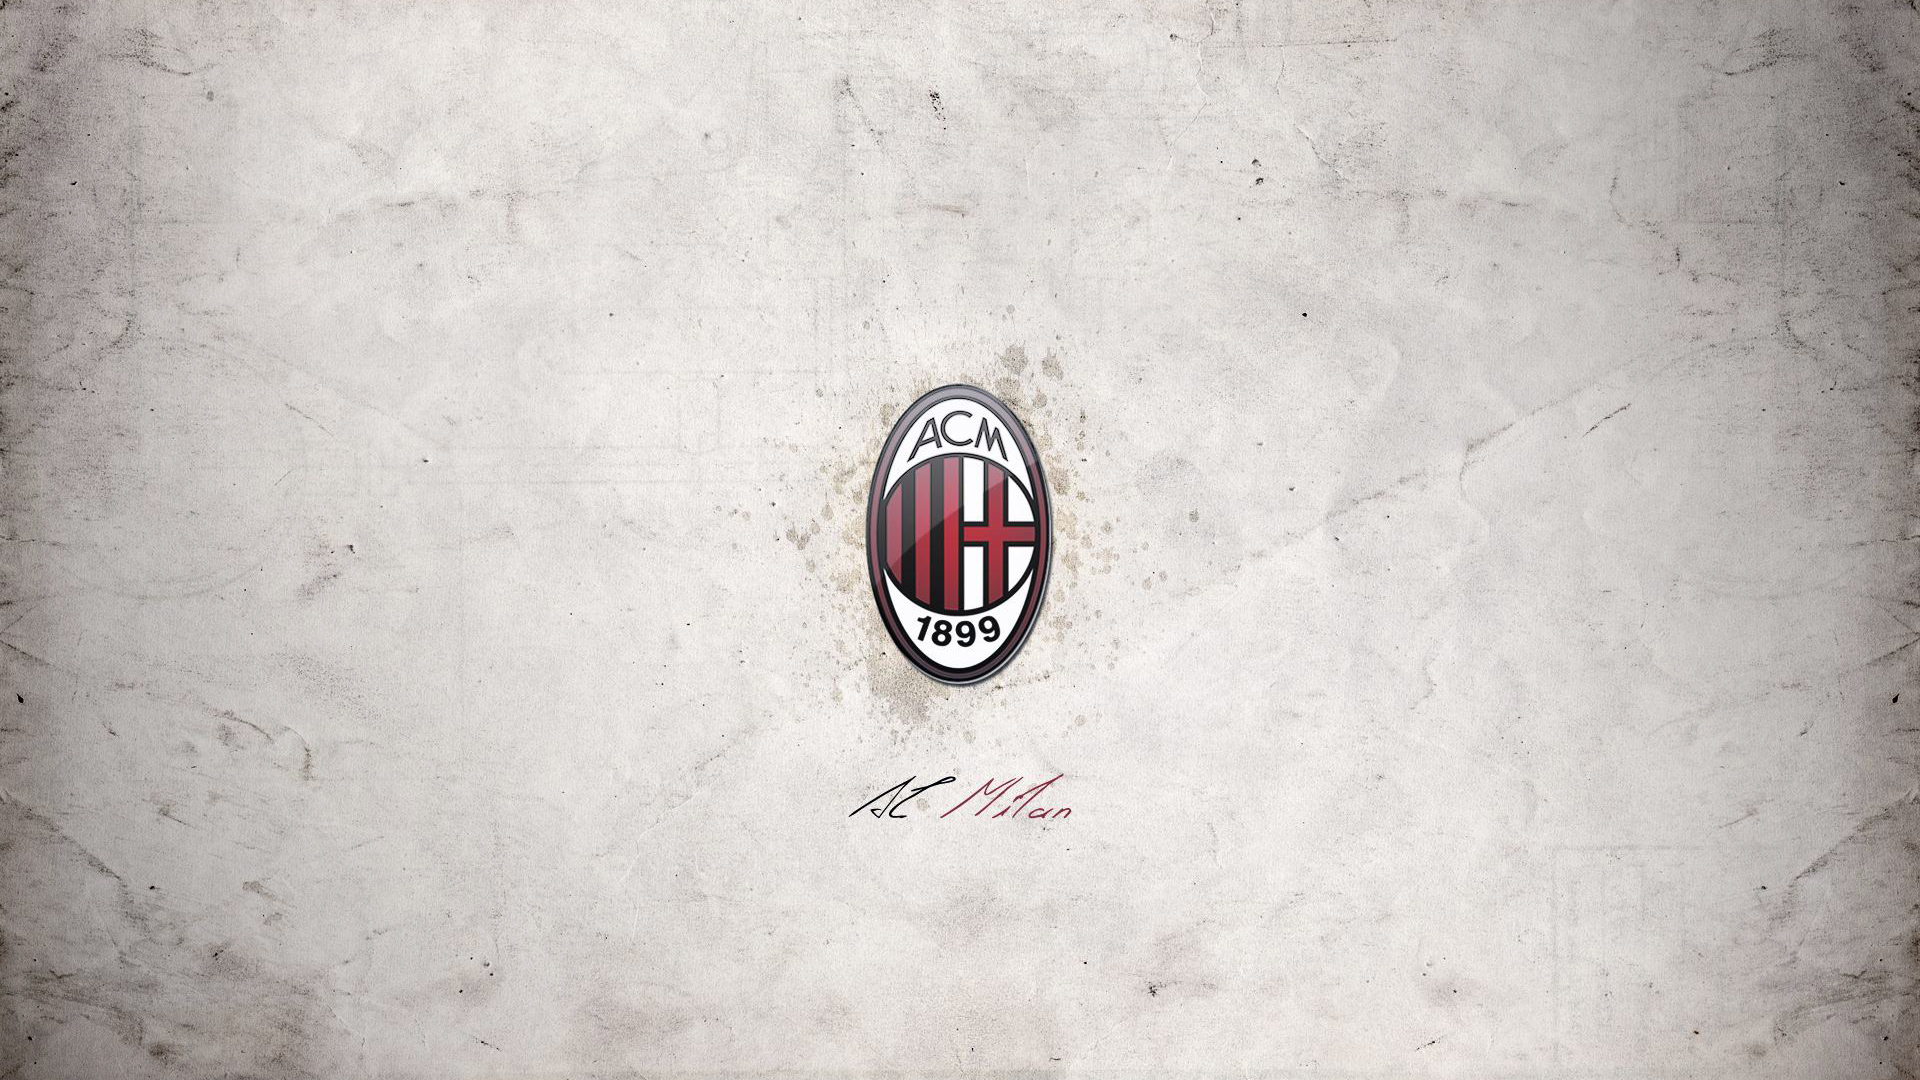 Best Ac Milan Football Club Logo Wallpaper Background With